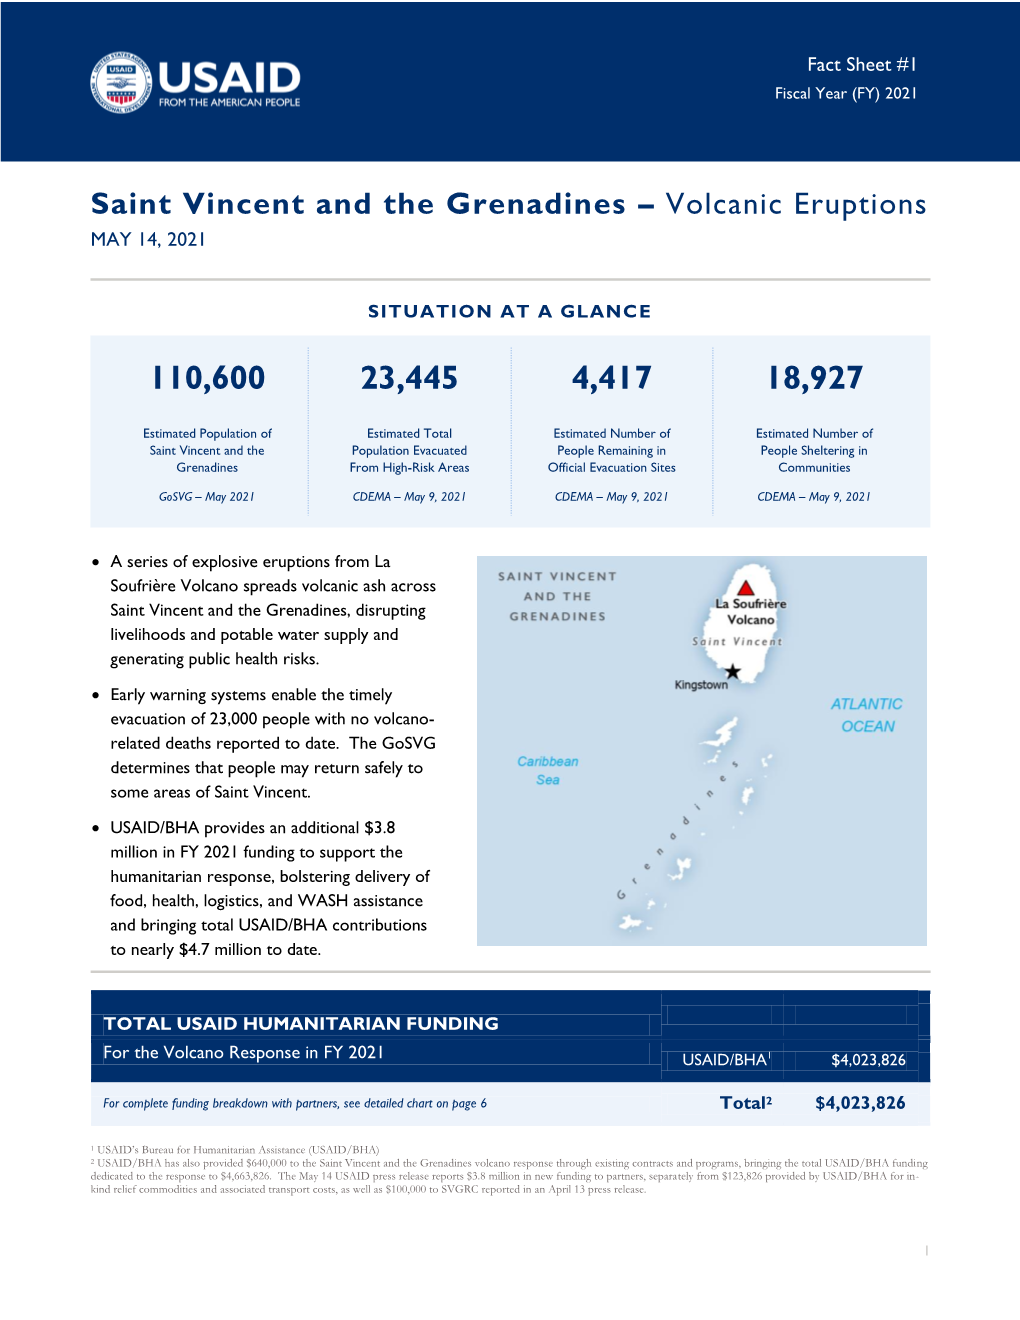 Saint Vincent and the Grenadines – Volcanic Eruptions MAY 14, 2021